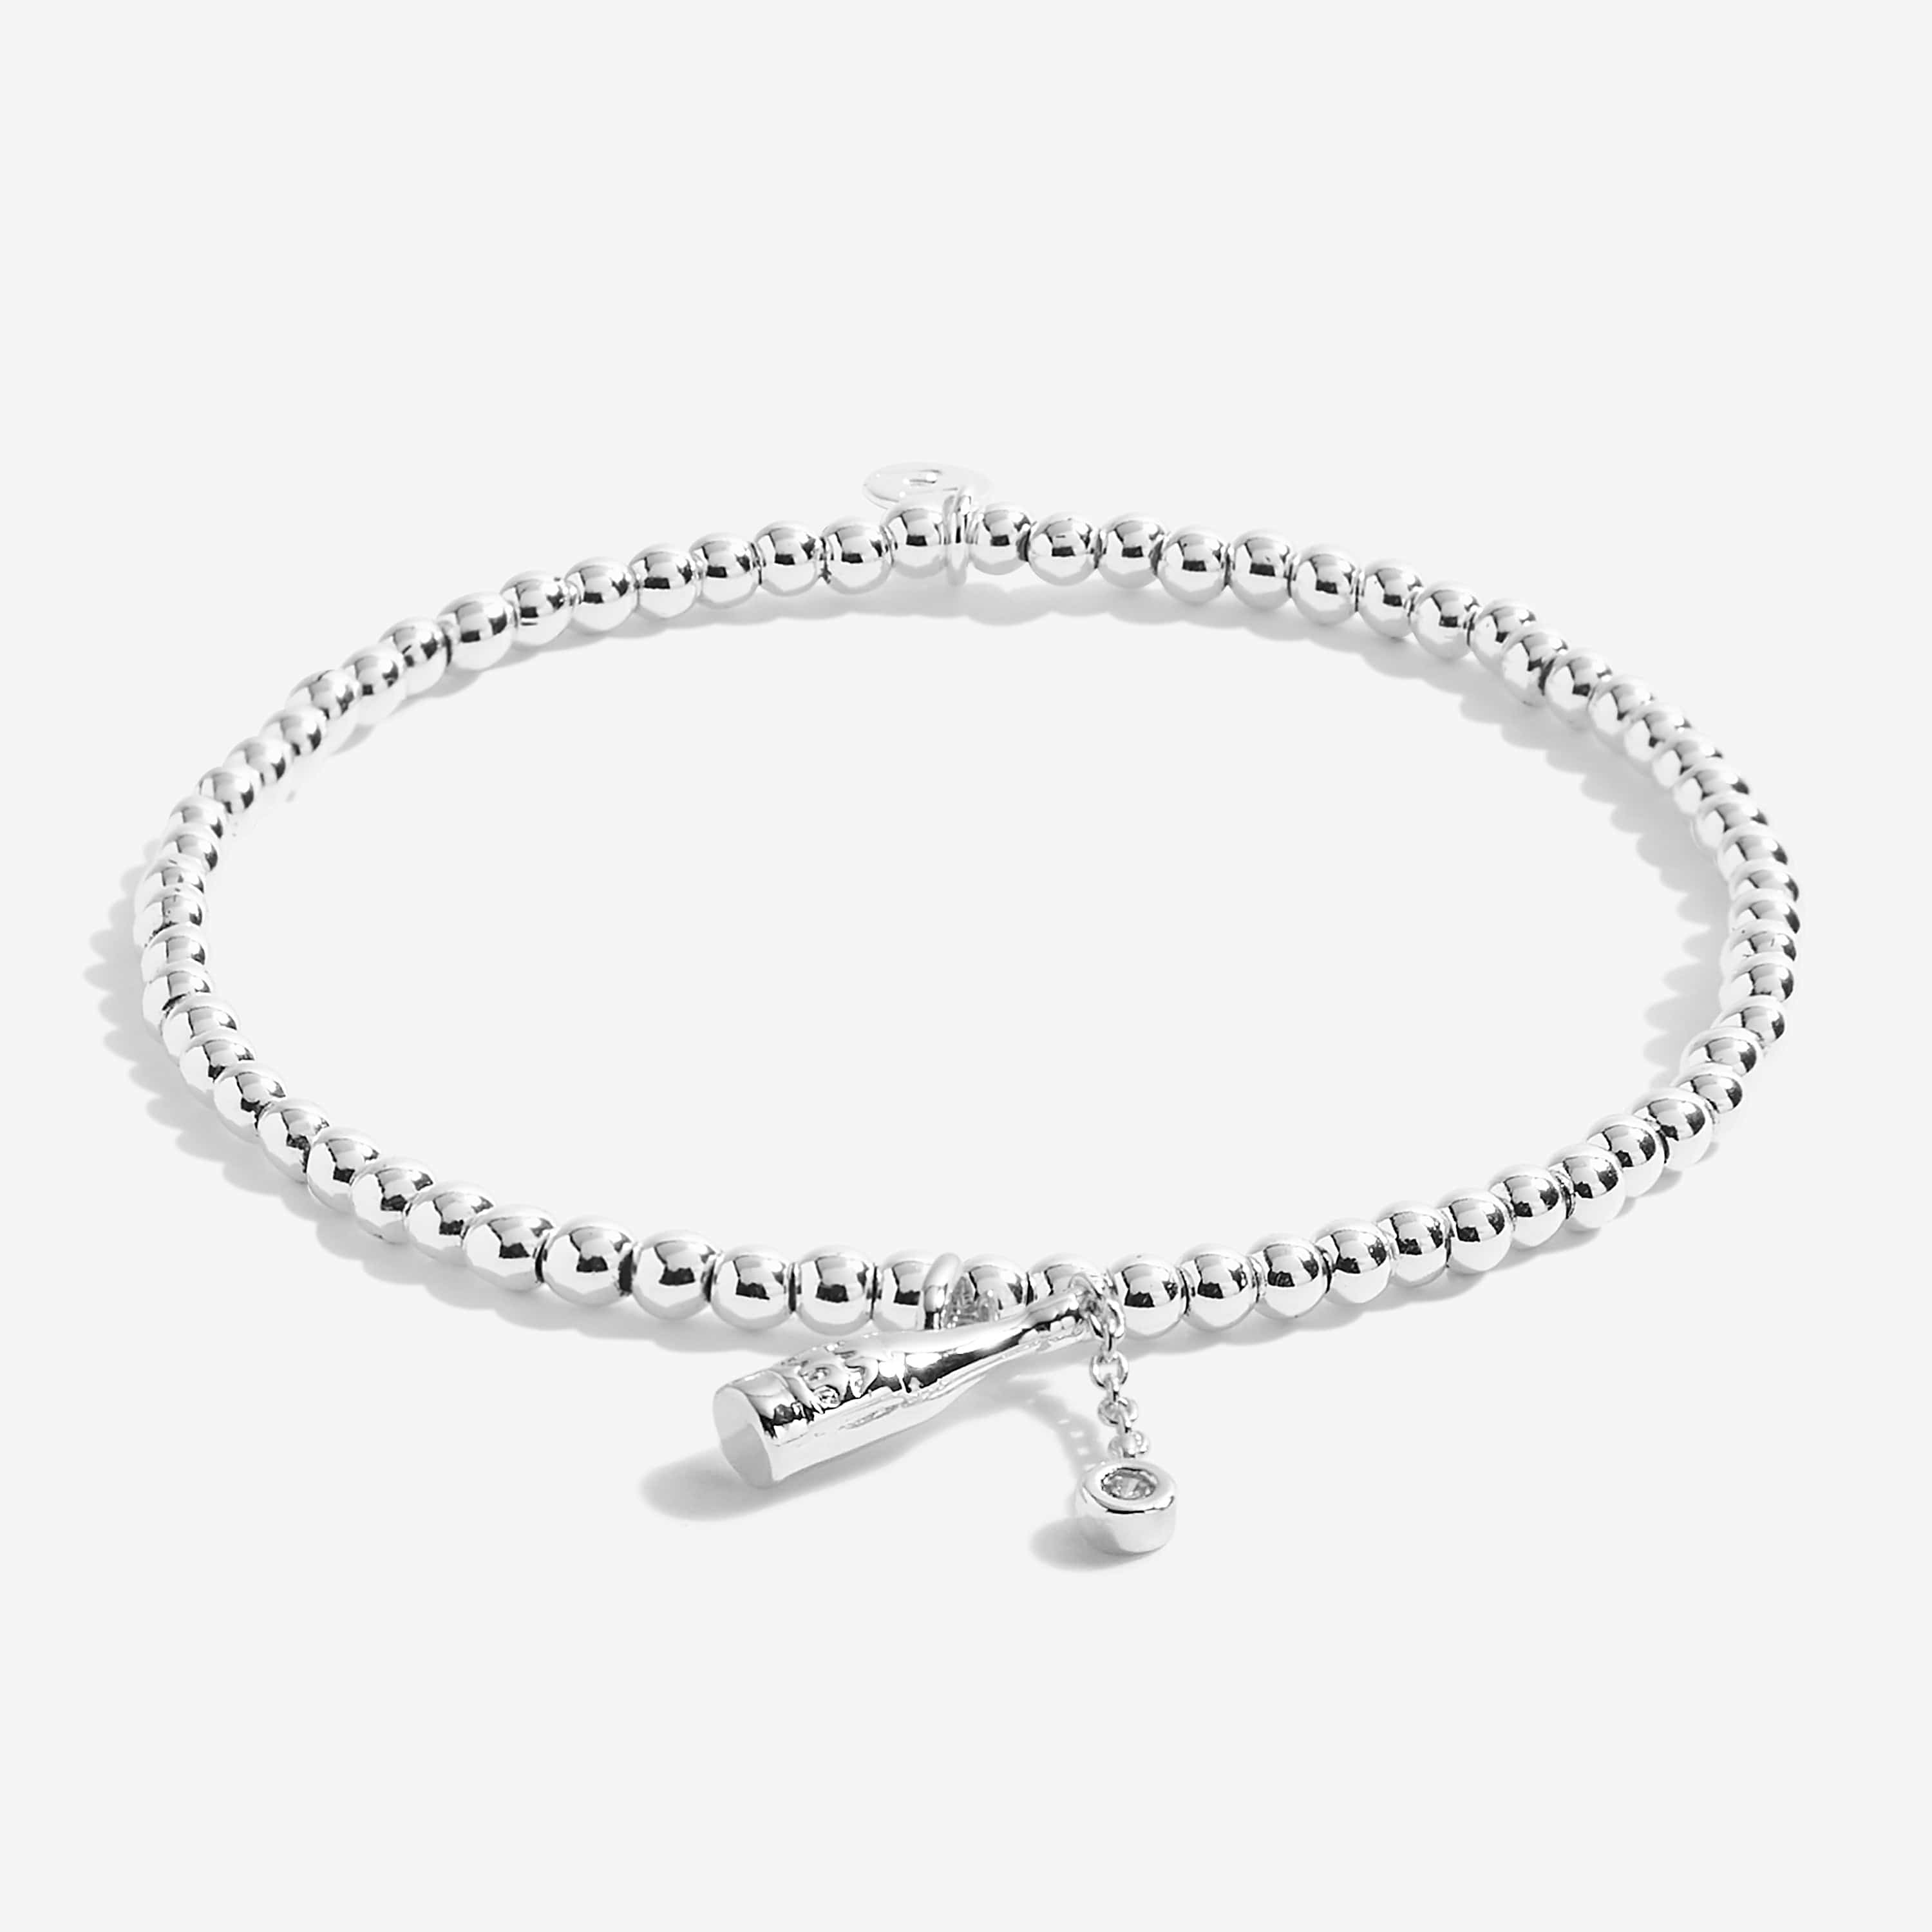 Joma Jewellery Bracelet Joma Jewellery Bracelet - A Little Pop the Bubbly